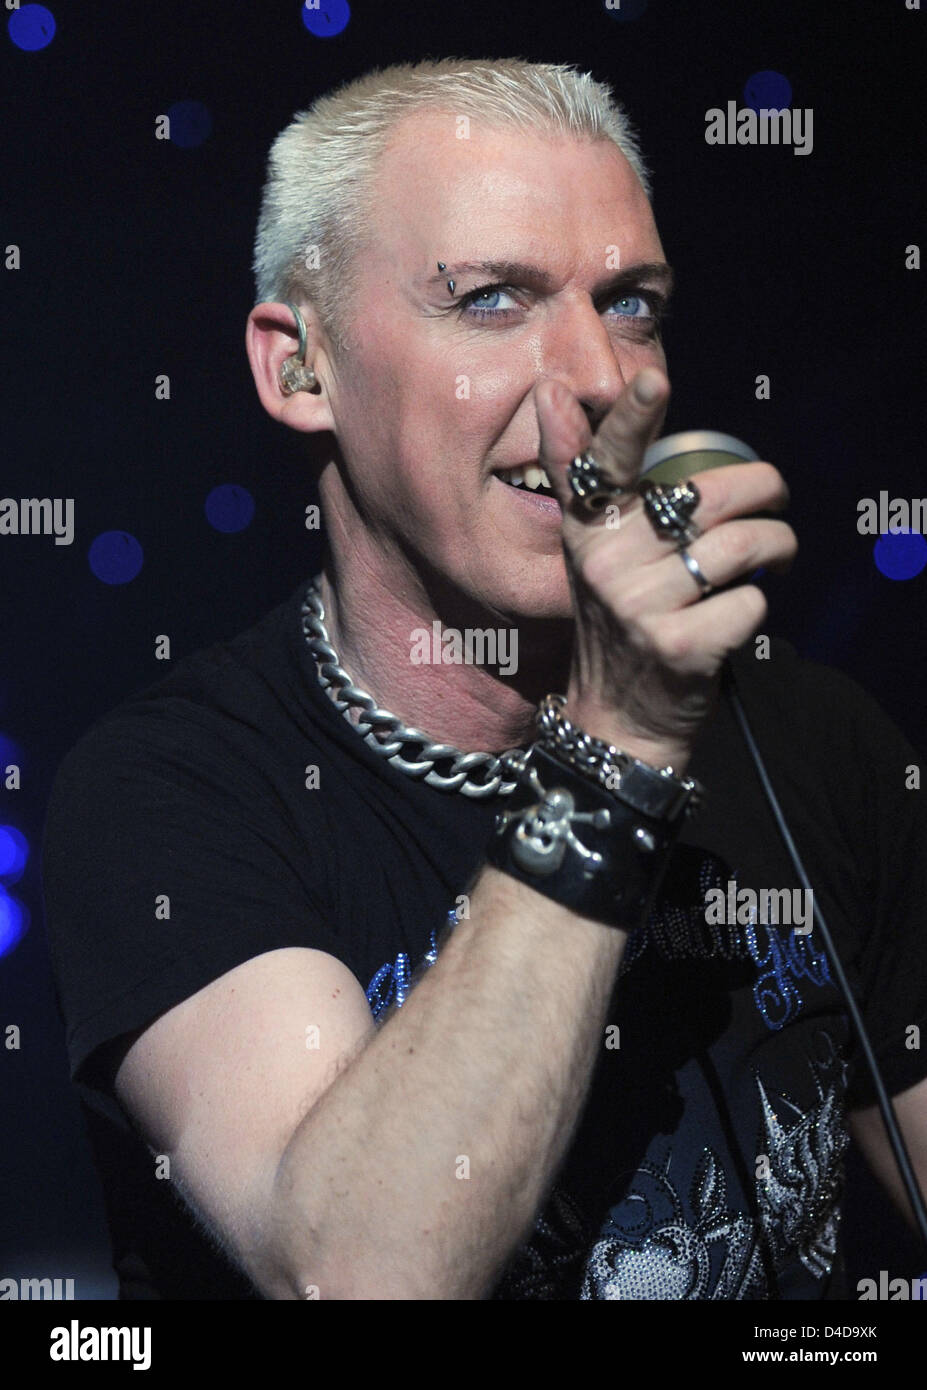 H.P. Baxxter, frontman of the German techno band Scooter, performs at the concert at Columbiahalle in Berlin, Germany, 06 April 2008. In 2007, Scooter had their 20th ten hit in